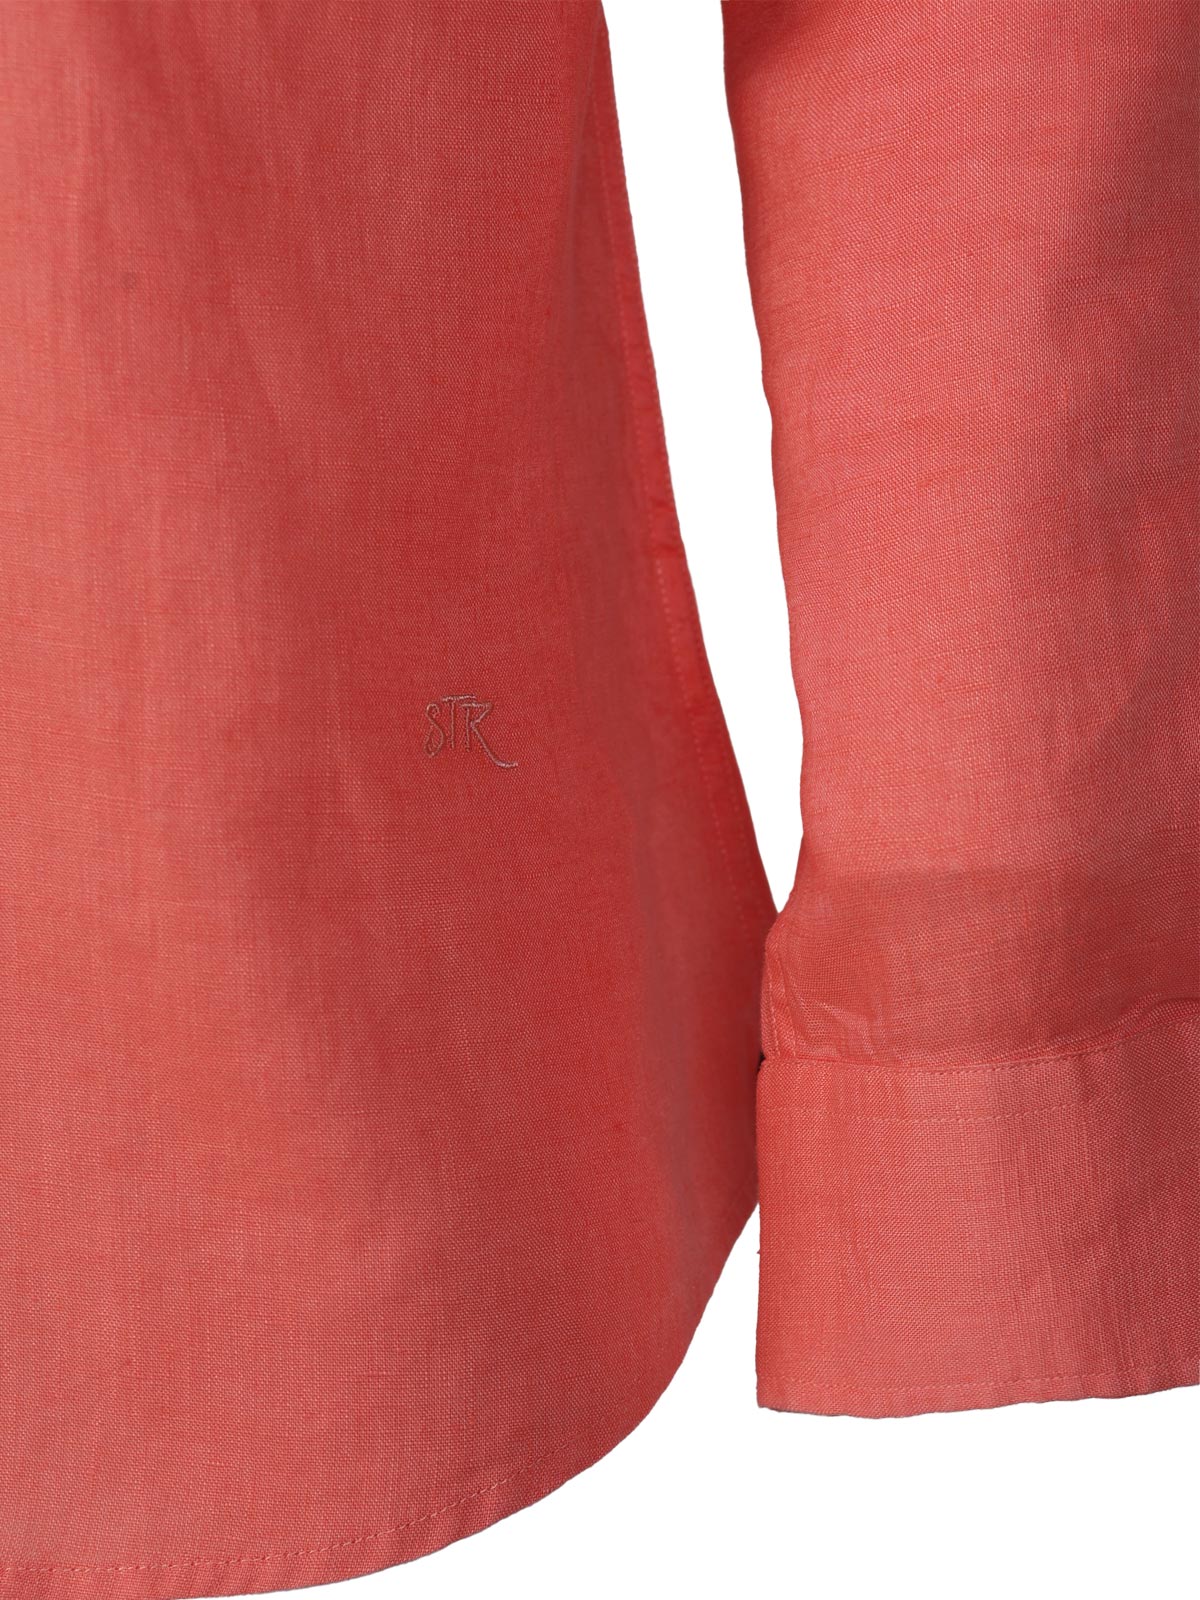 Linen shirt in coral color - 21593 € 55.12 img3